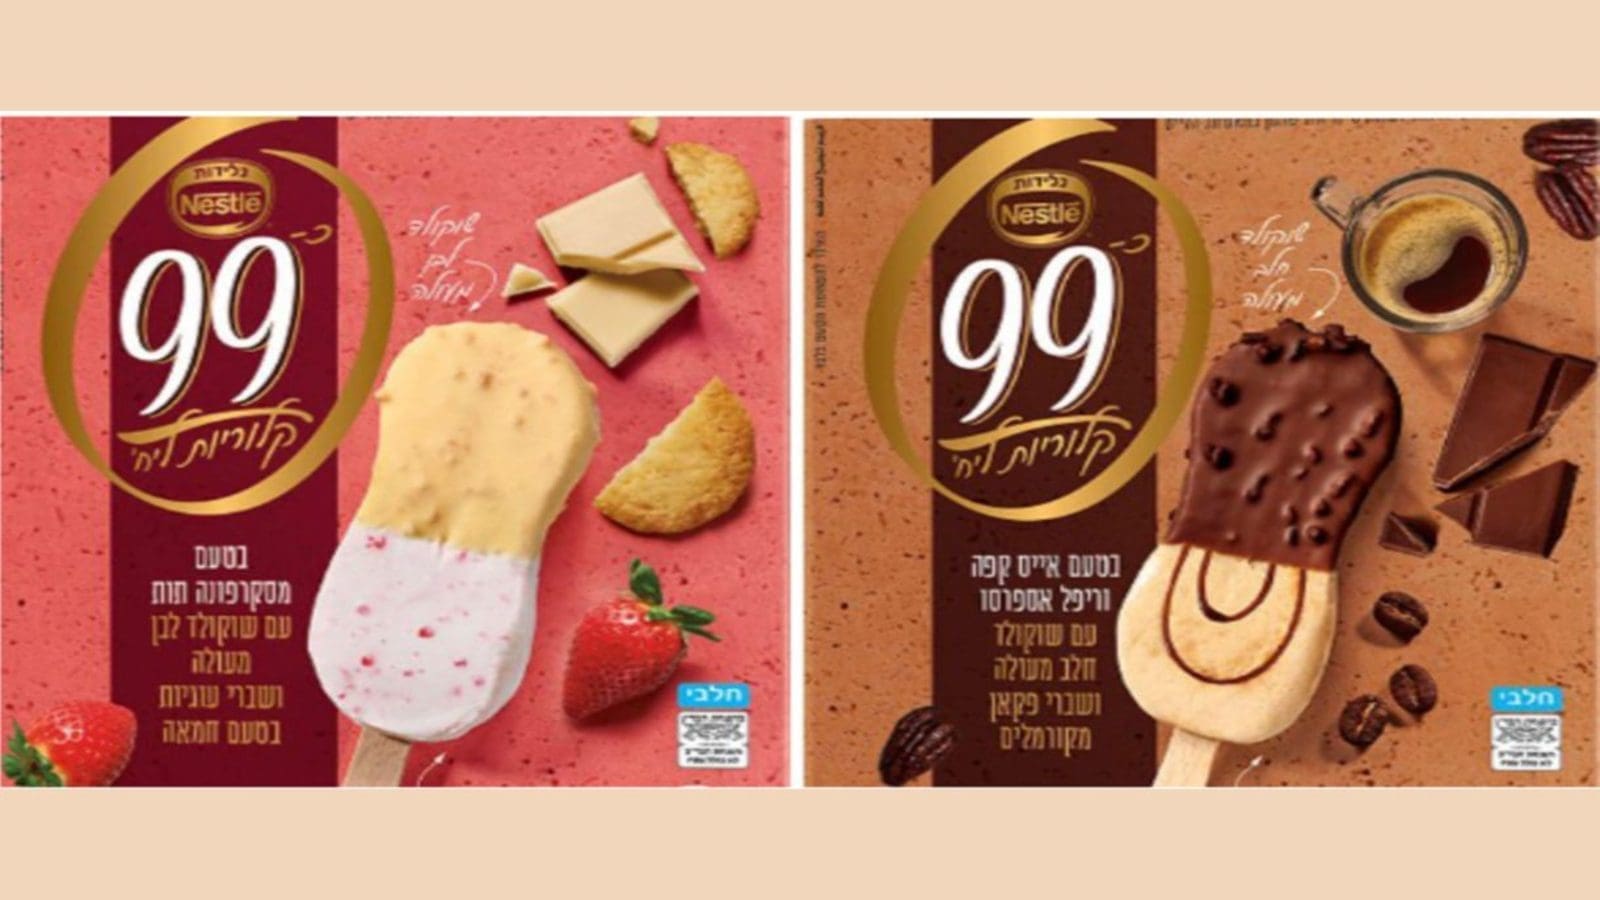 Nestlé-Froneri cuts 70% sugar in newly launched 99 Calorie Ice Cream Bars using Resugar Synergy